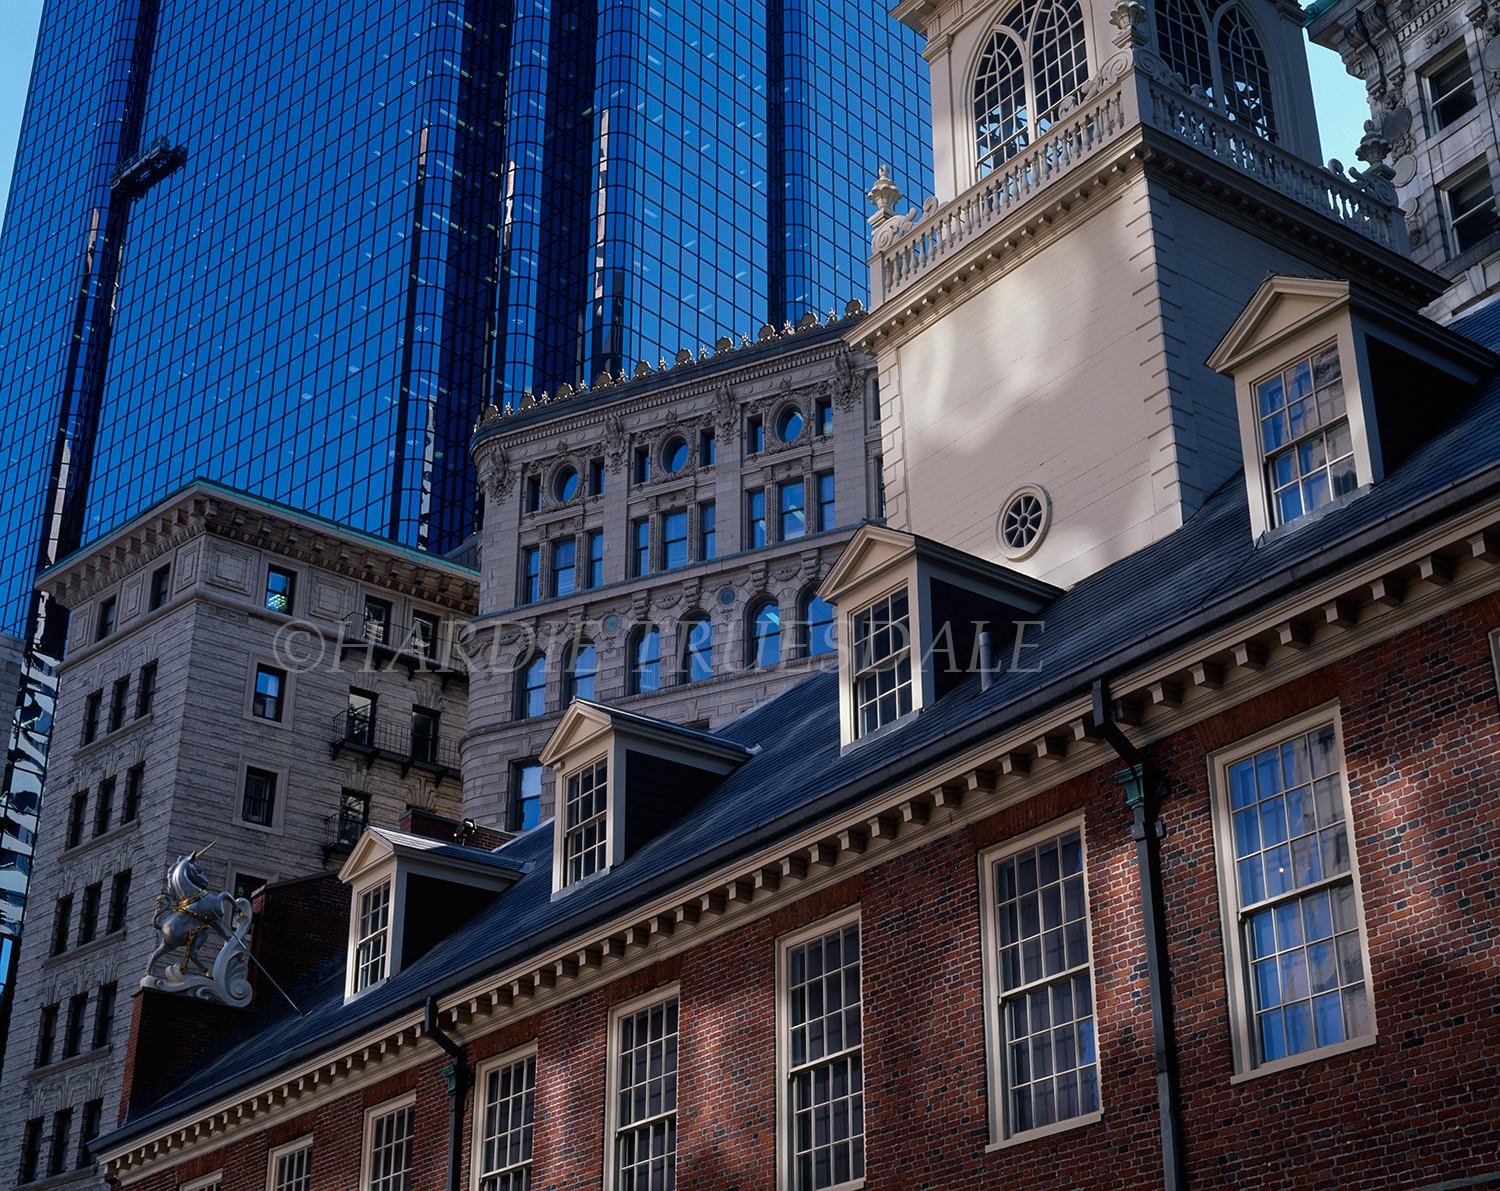 Bos#11 "Old and New", Boston